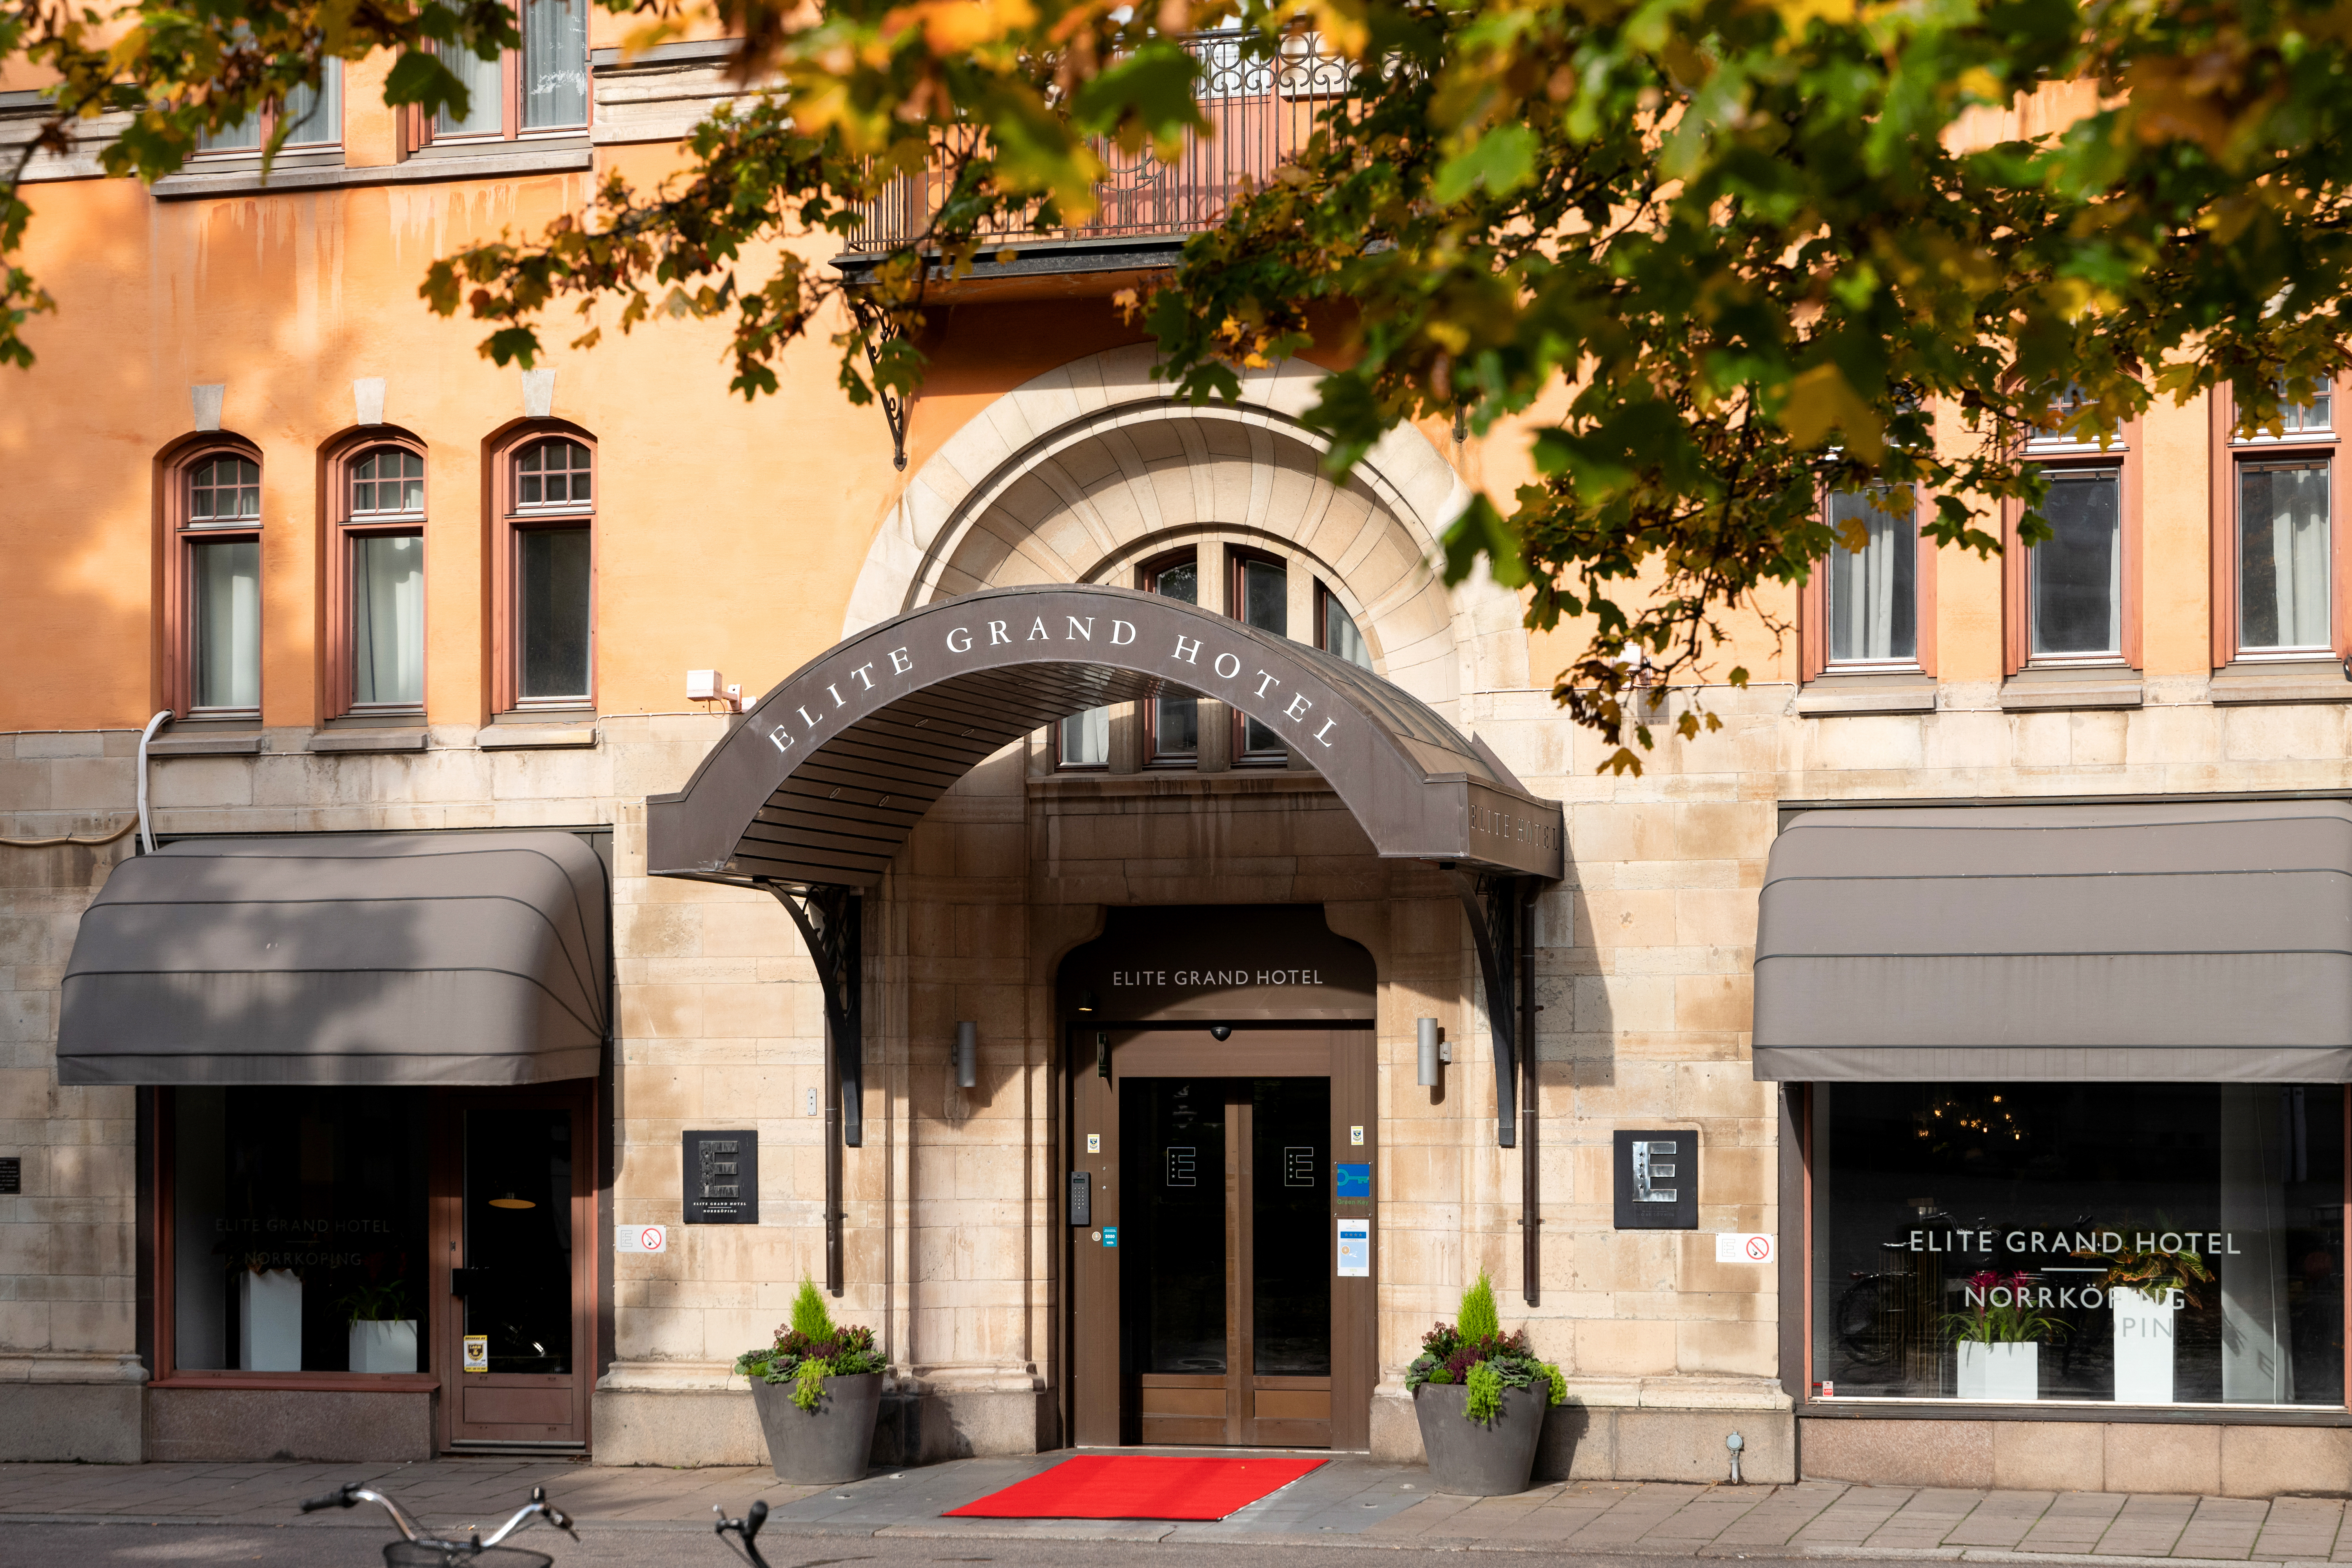 Luxorious entrance to Elite Grand Hotel in Norrköping